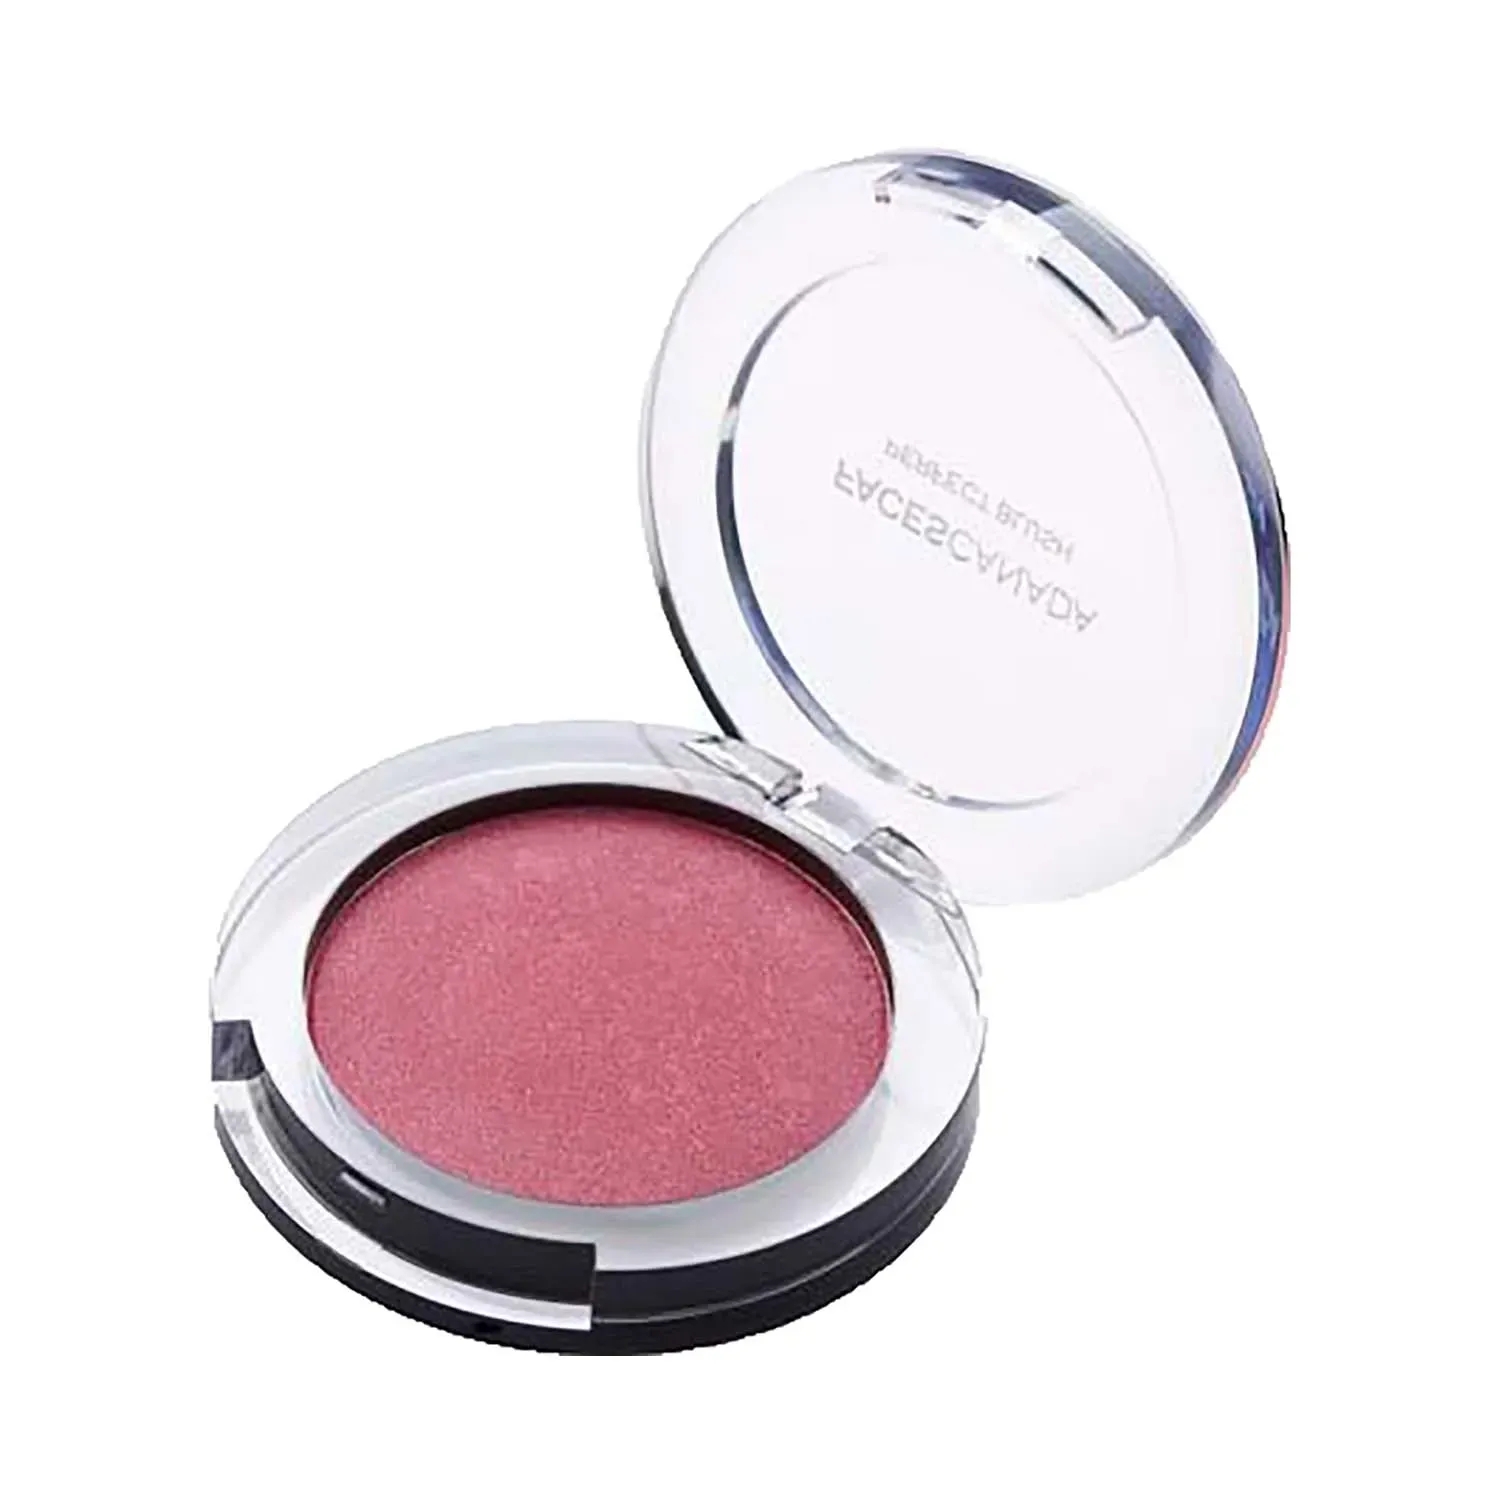 Faces Canada | Faces Canada Perfecting Blush - 02 Hot Pink (5g)